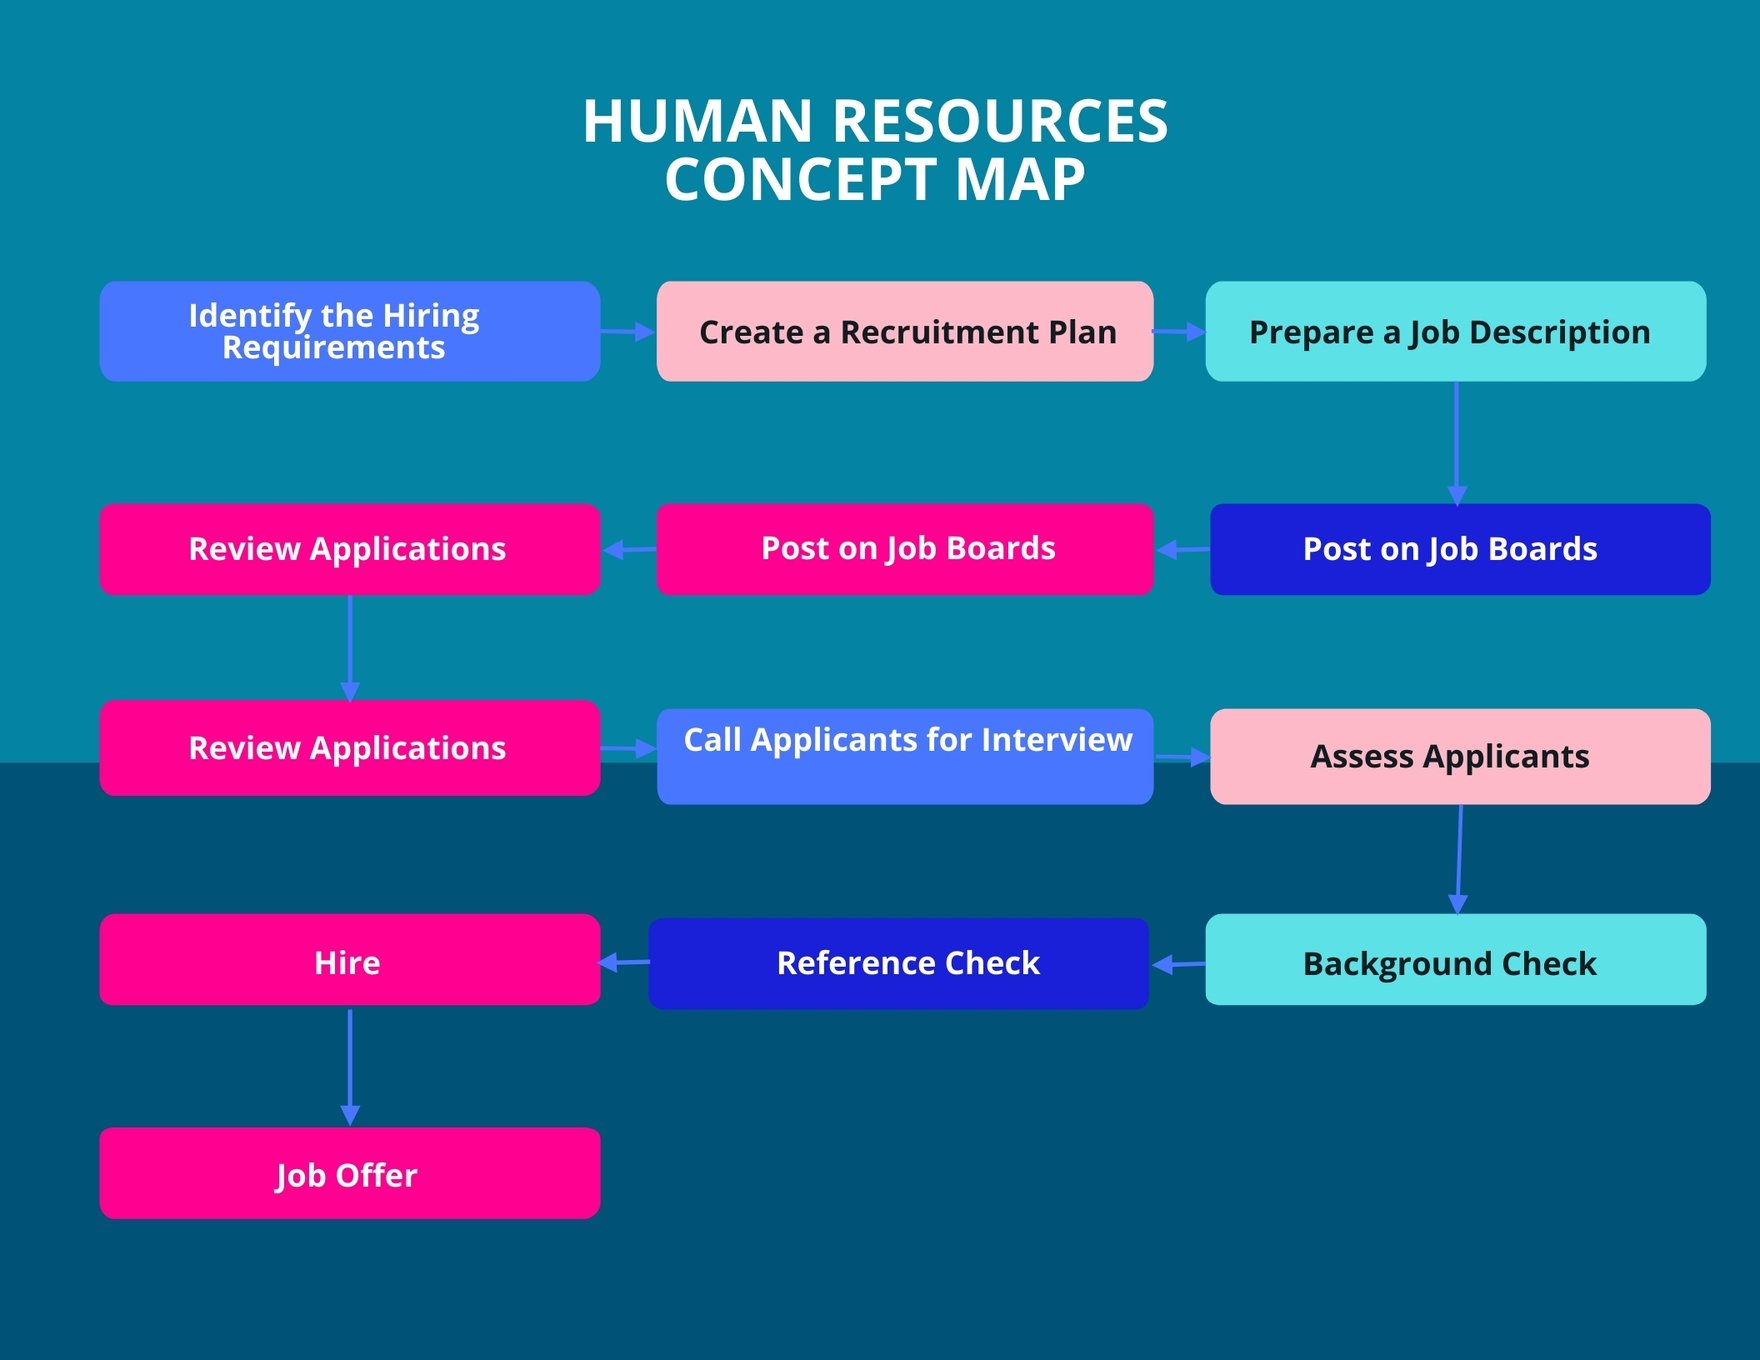 Human Resources Concept Map Template in Word, Google Docs